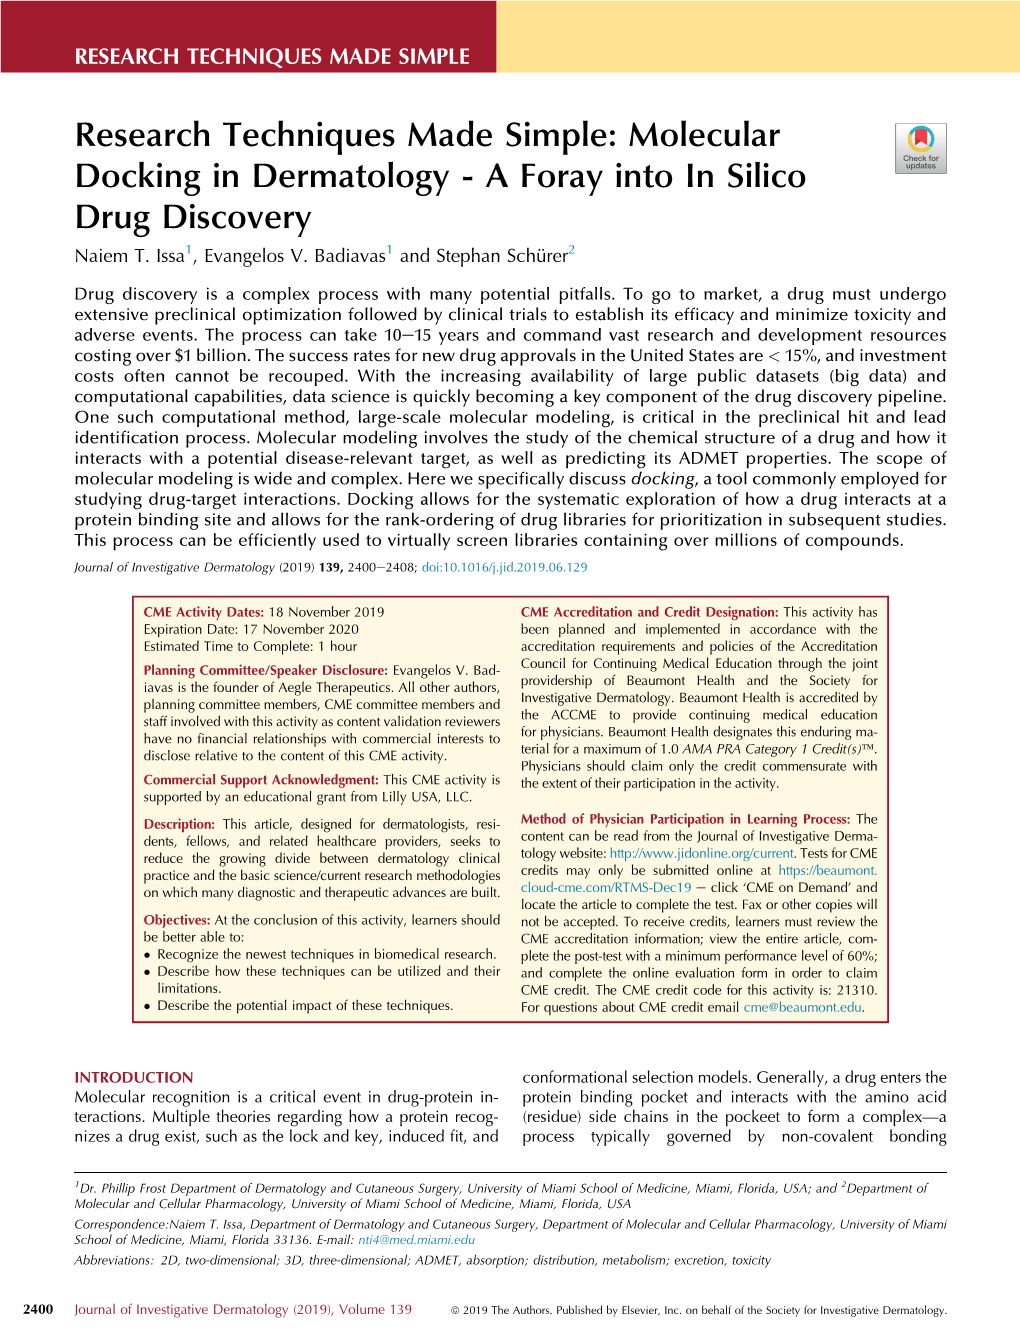 Molecular Docking in Dermatology - a Foray Into in Silico Drug Discovery Naiem T